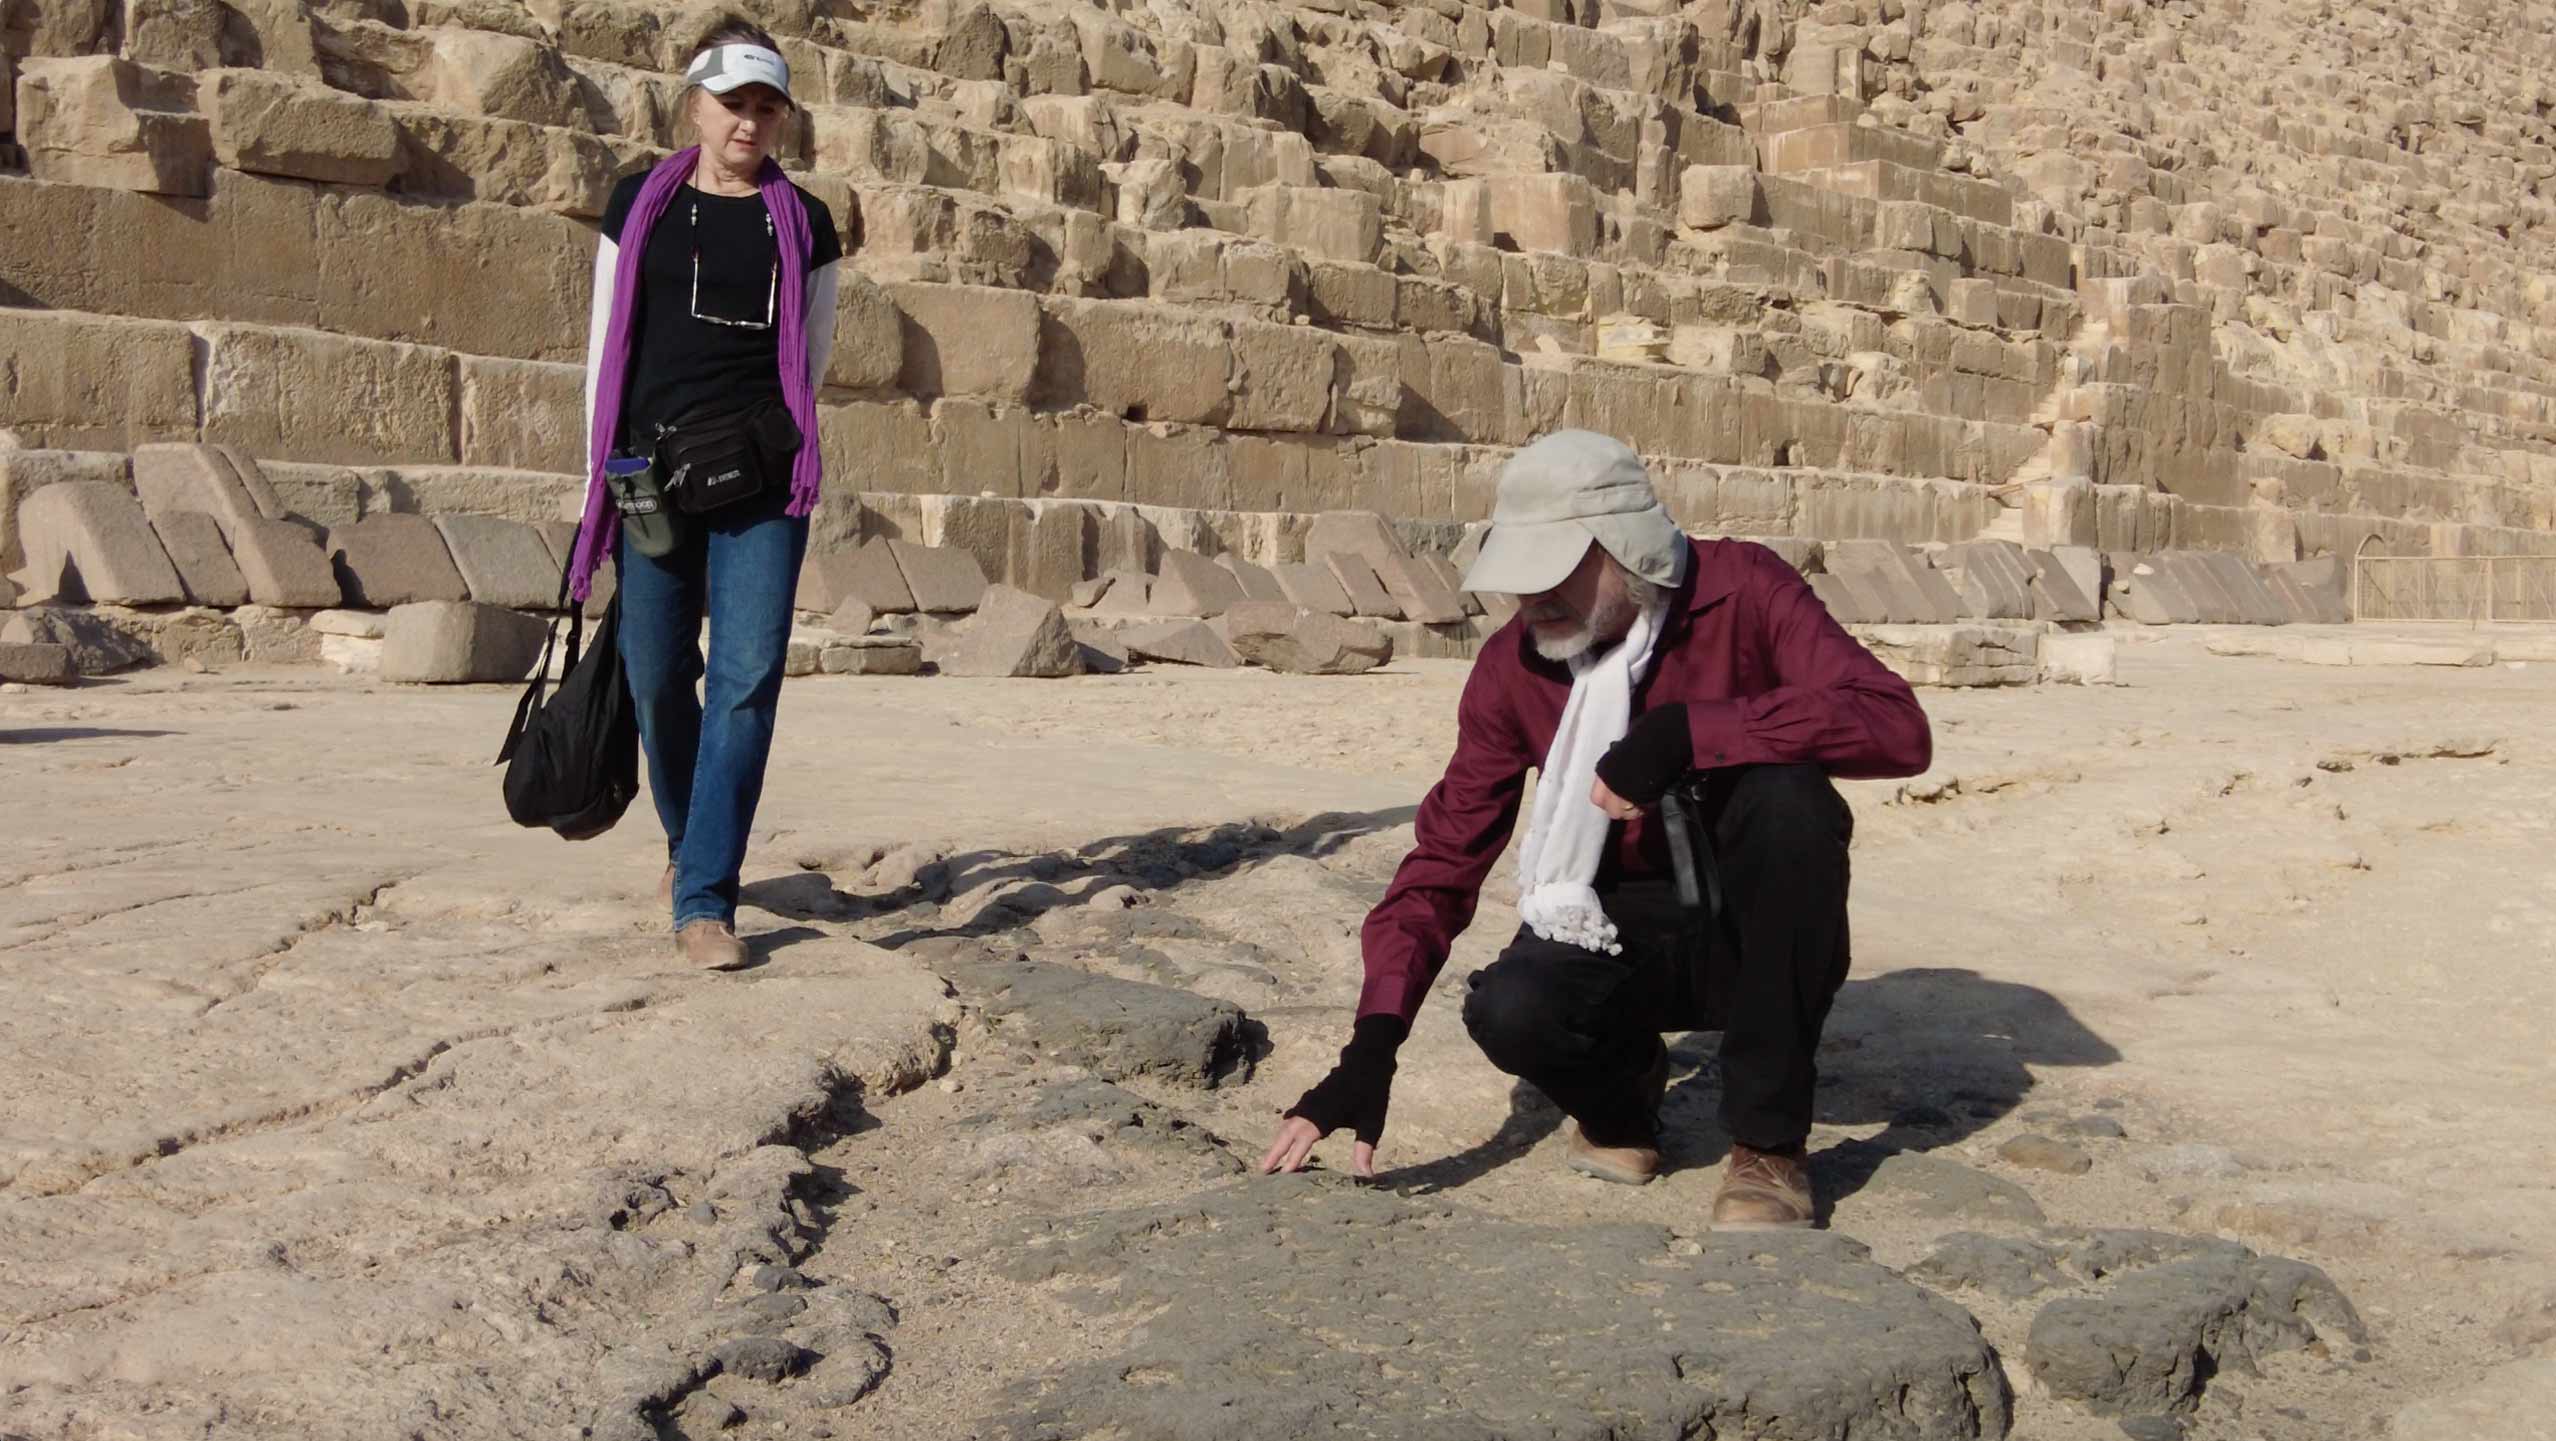 Image of Dr. Schoch and Catherine Ulissey studying vitrified bedrock near the Second Pyramid at Giza